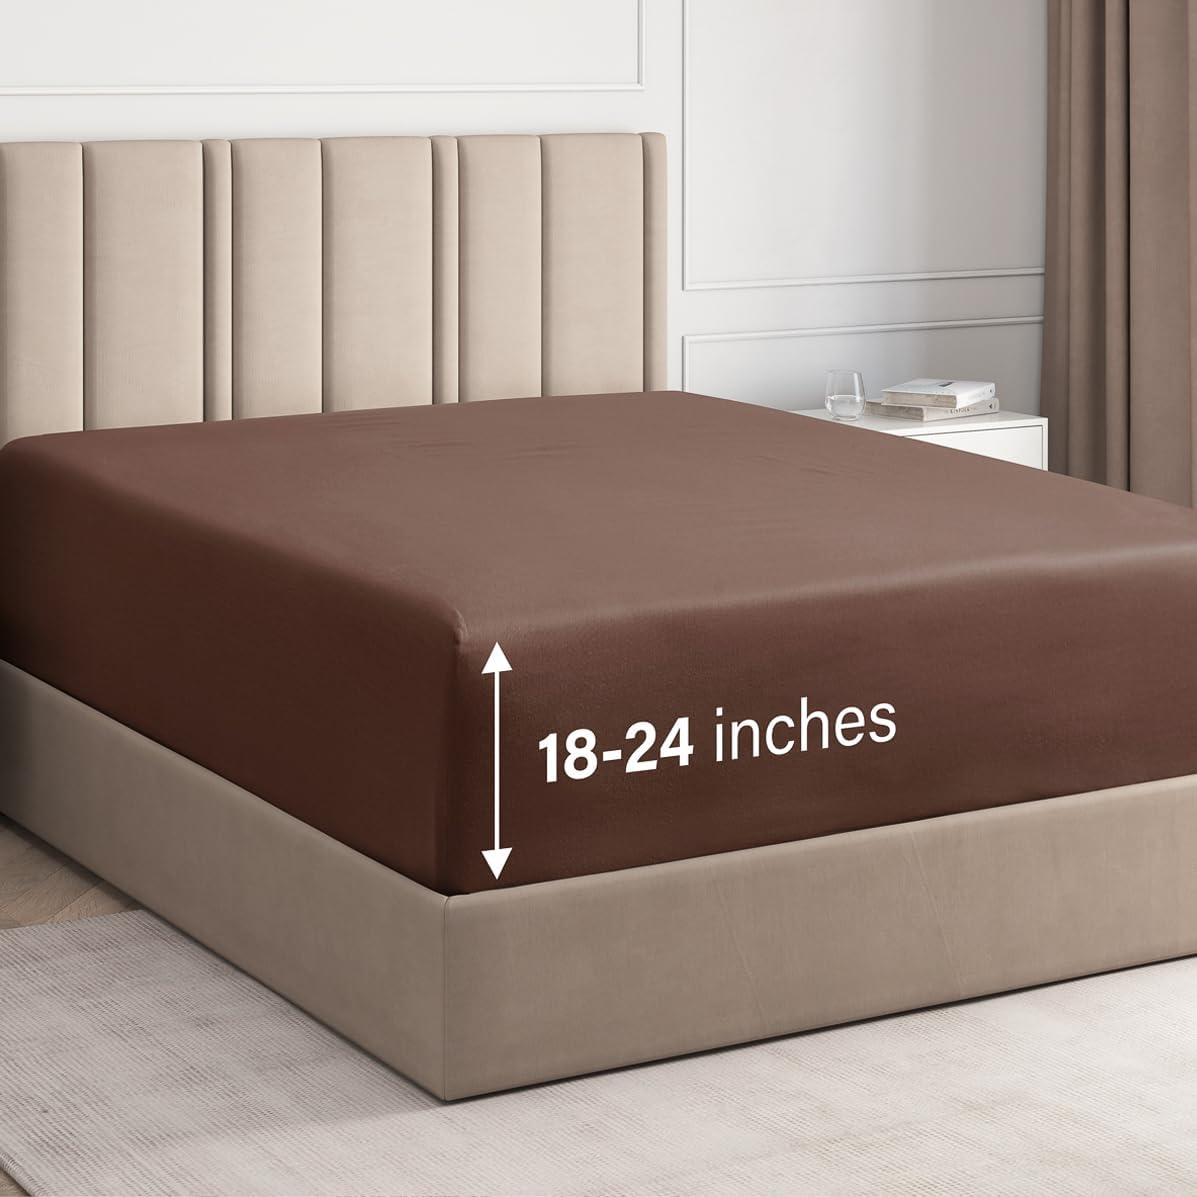 tes Deep Pocket Single Fitted Sheet - Brown